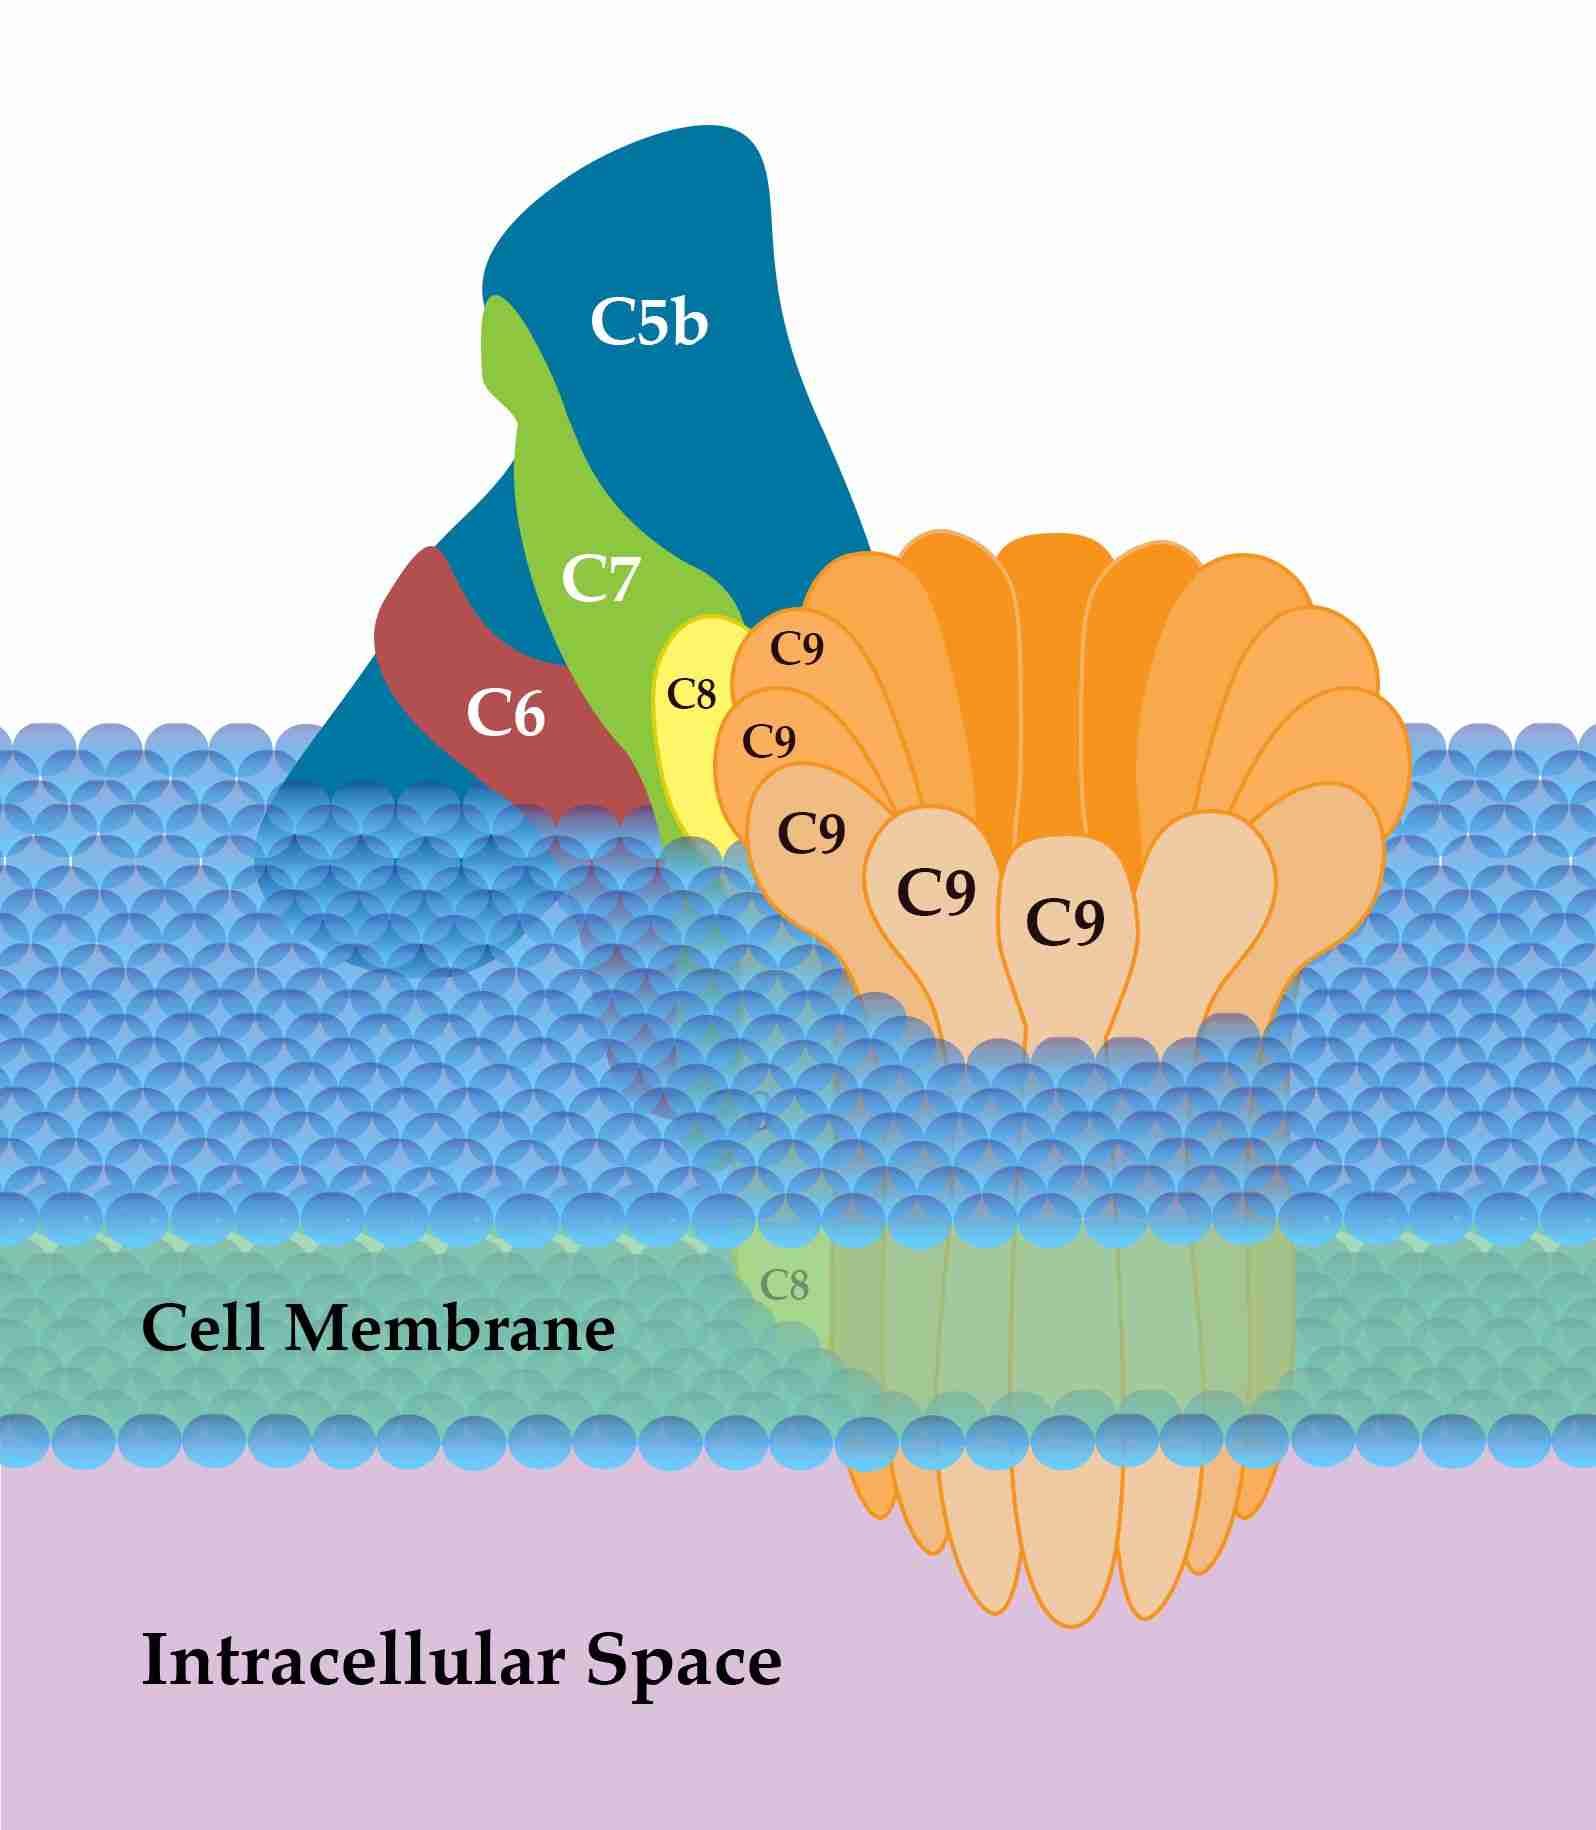 Fig. 1 C7 is the significant component of MAC. （By SLiva2016, Own work, https://commons.wikimedia.org/wiki/File:Membrane_Attack_Complex_(Terminal_Complement_Complex_C5b-9).png)